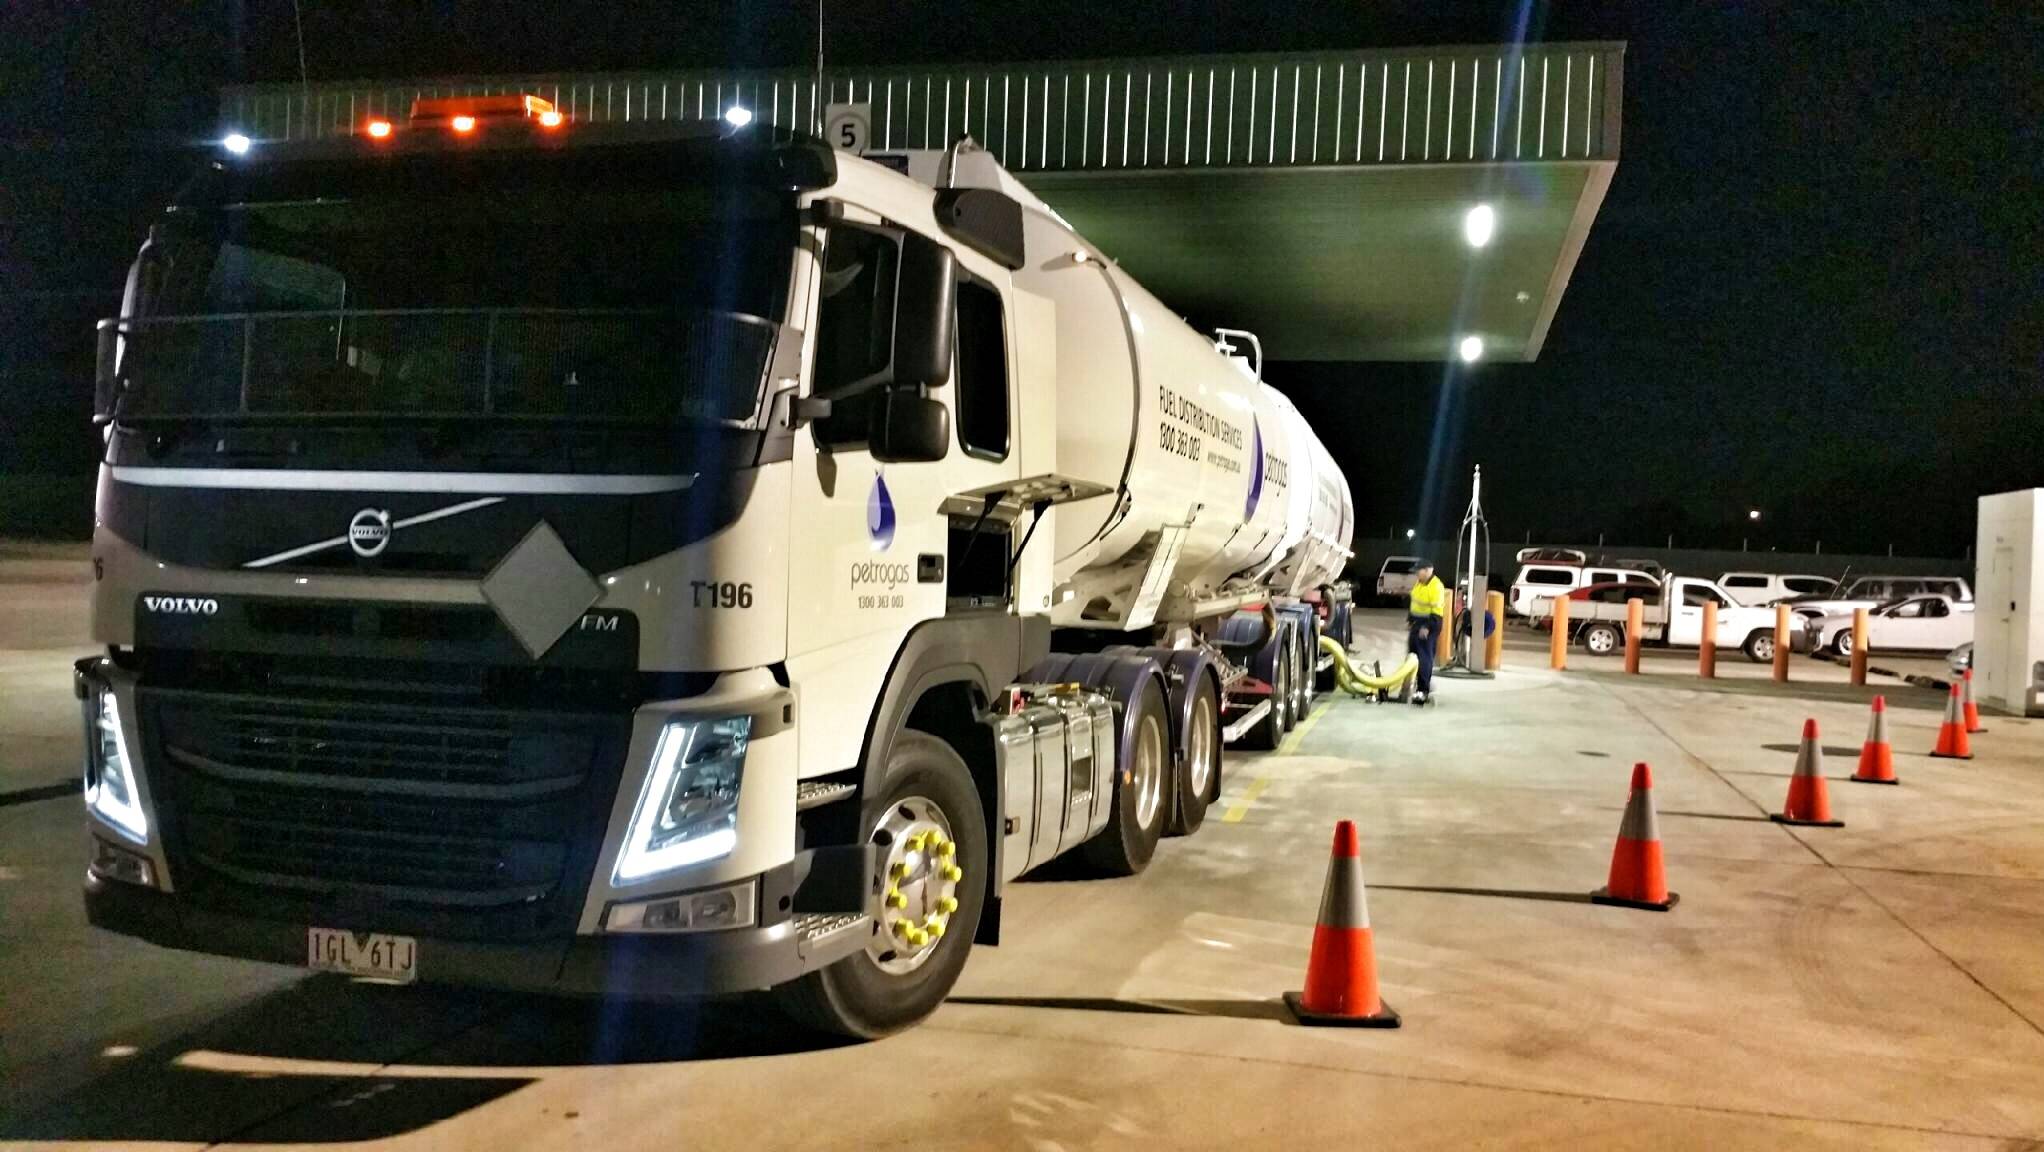 Image Photo A Mobil fleet hauler, Petrogas, delivers diesel to a customer in Adelaide. We ask a great deal of our drivers. Not only do they need to drive safely, but they have to load and unload their fuel cargos safely.